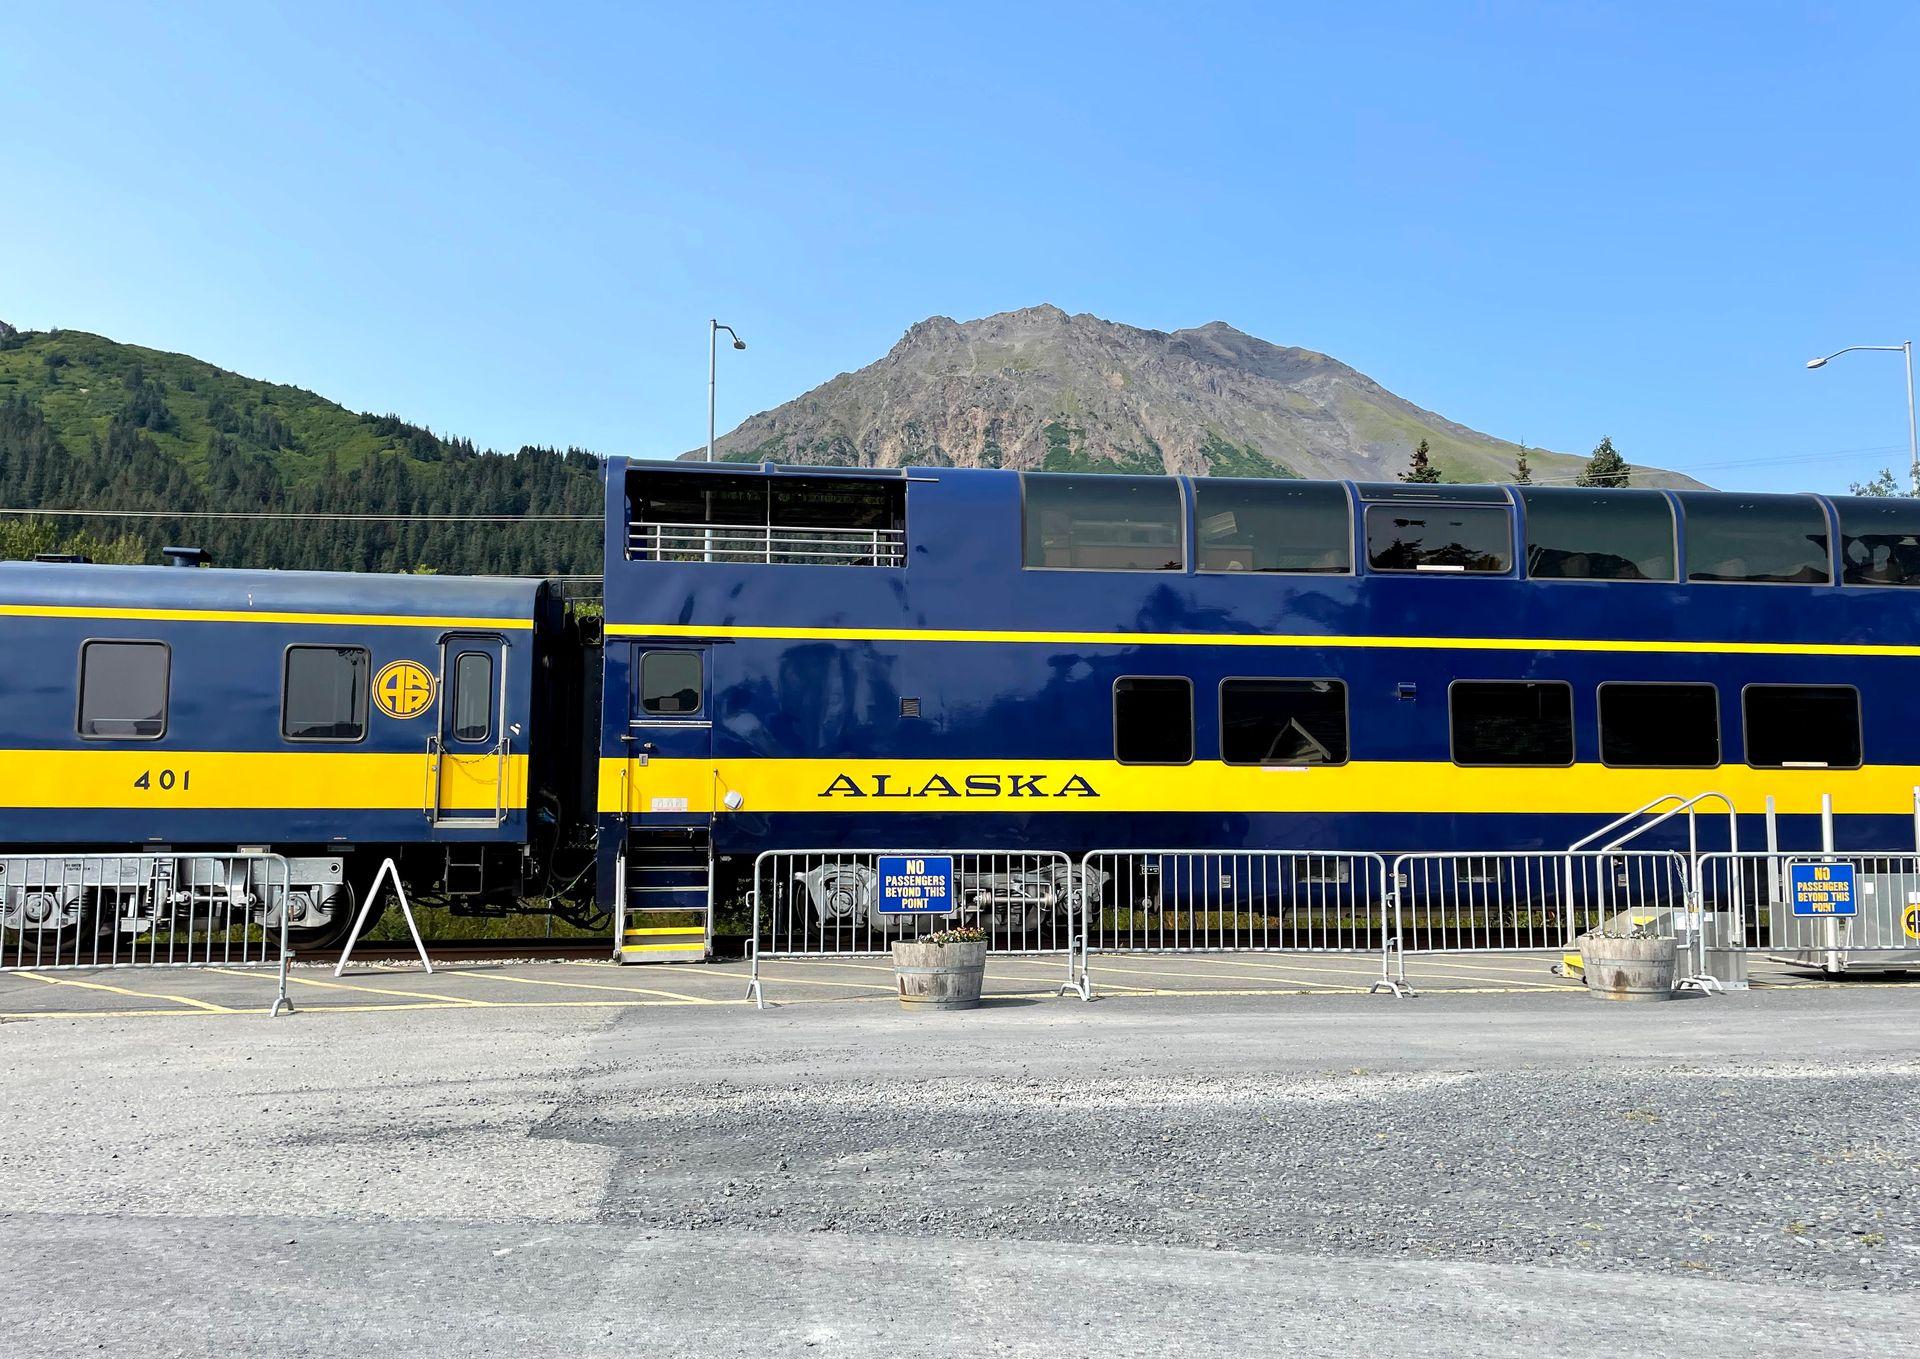 A blue and yellow train part of the Alaska Railroad parked at a station.